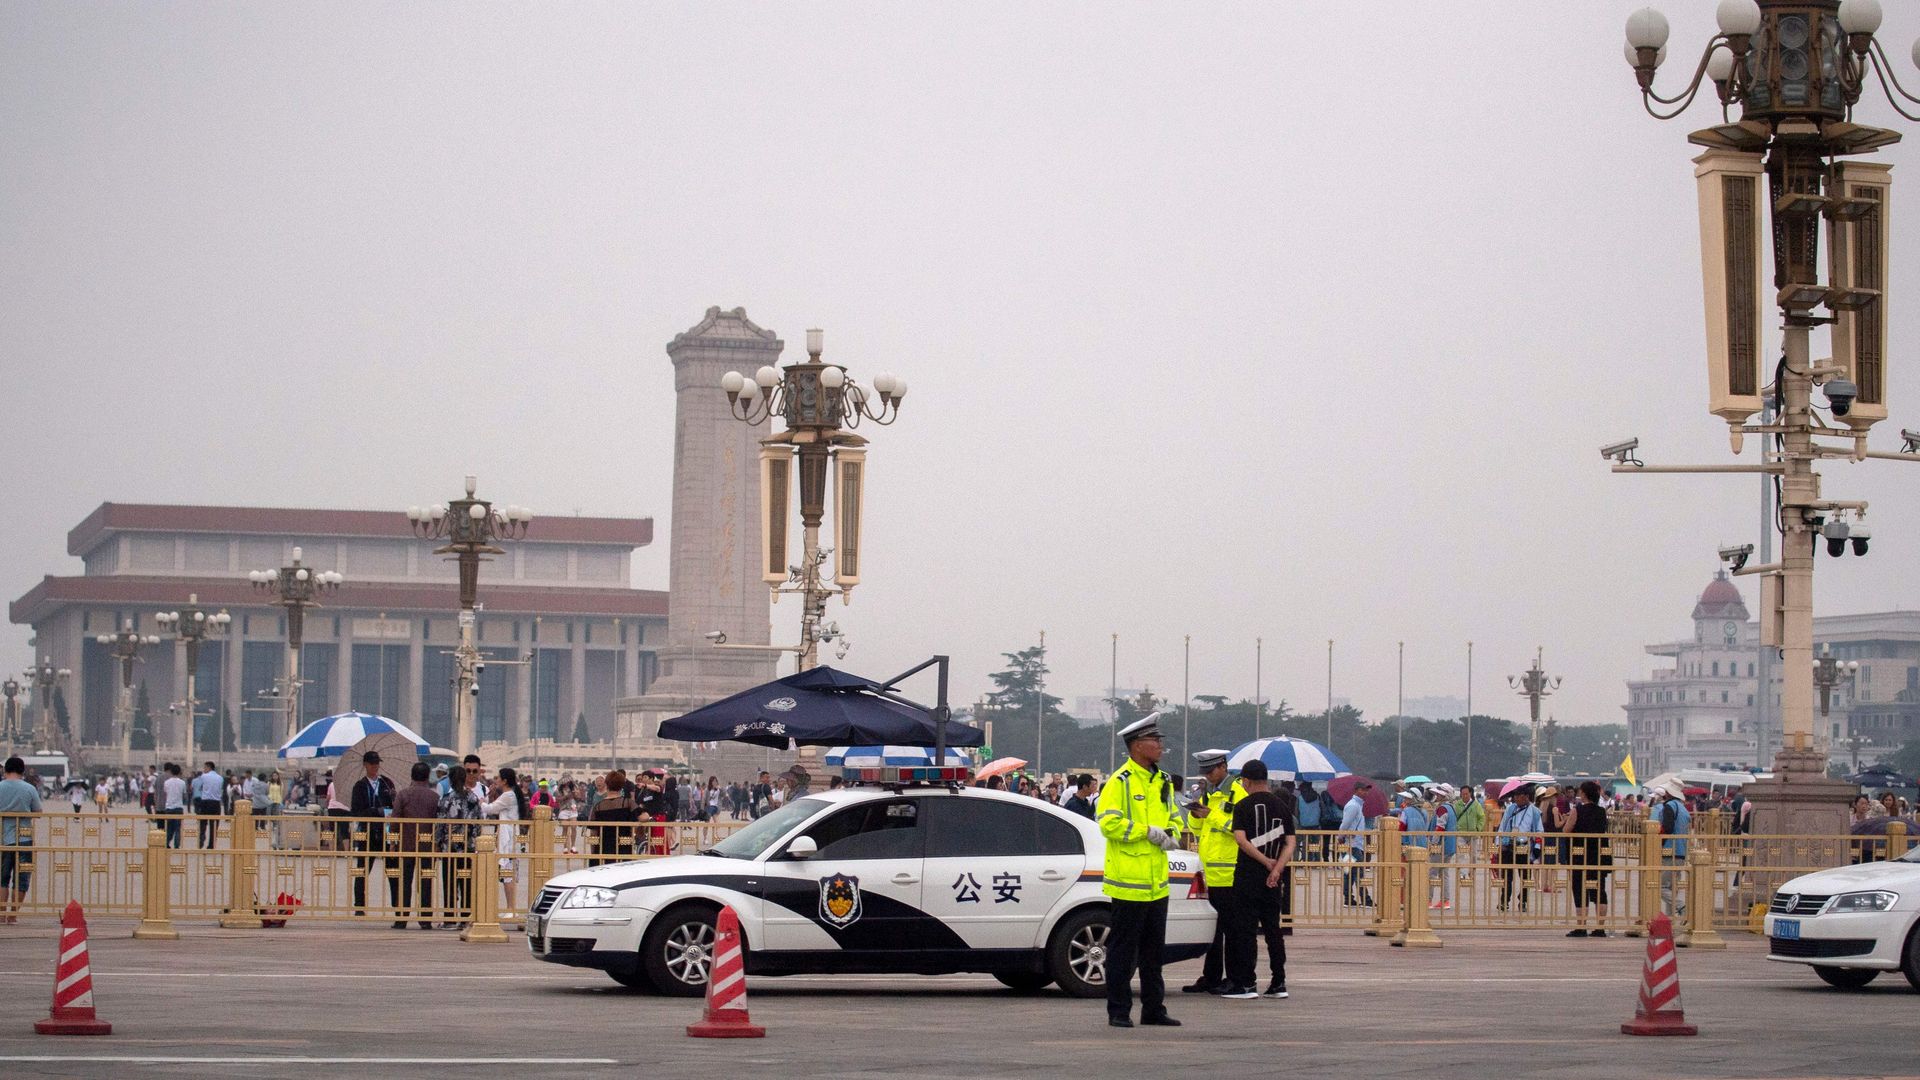 Police officers stand in front of Tiananmen Square in Beijing on June 4, 2019.